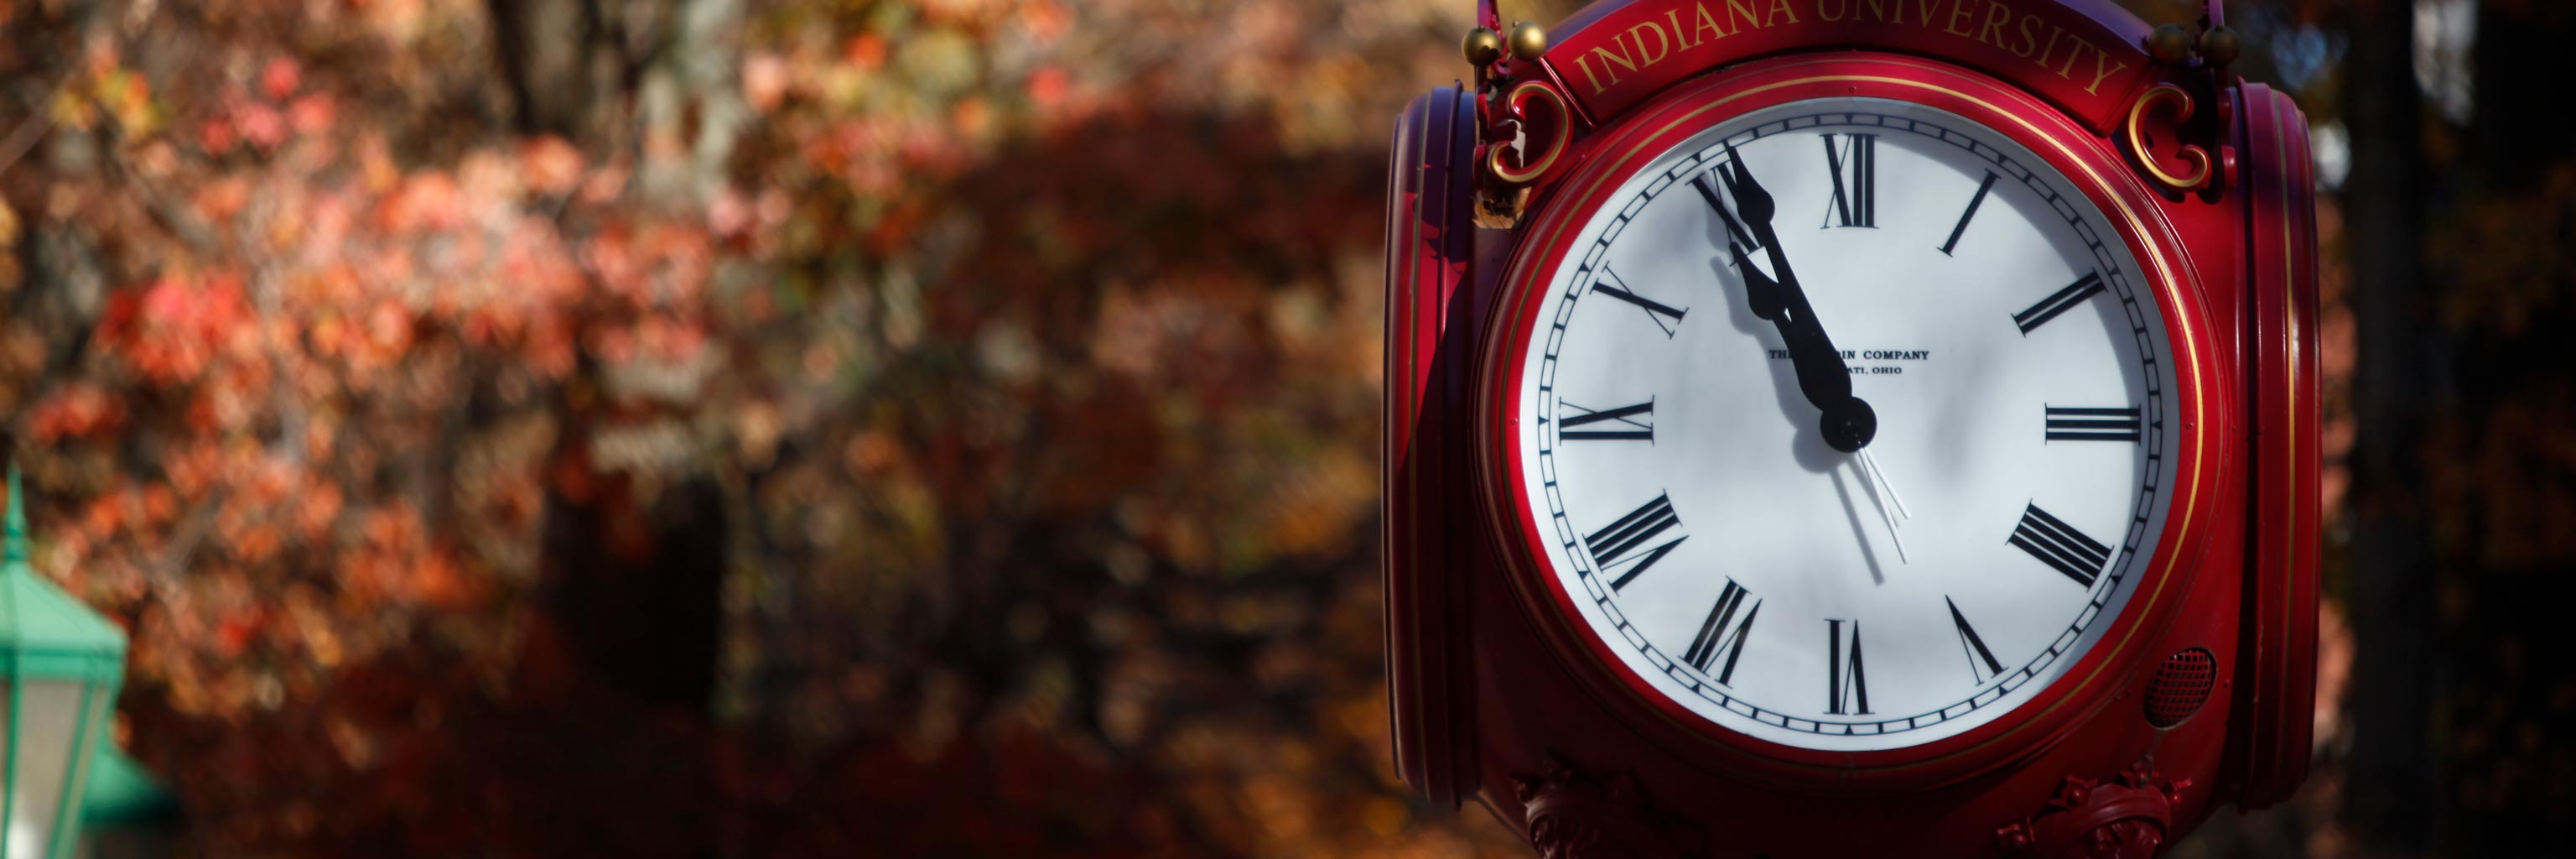 Indiana University red analog clock with gold accents